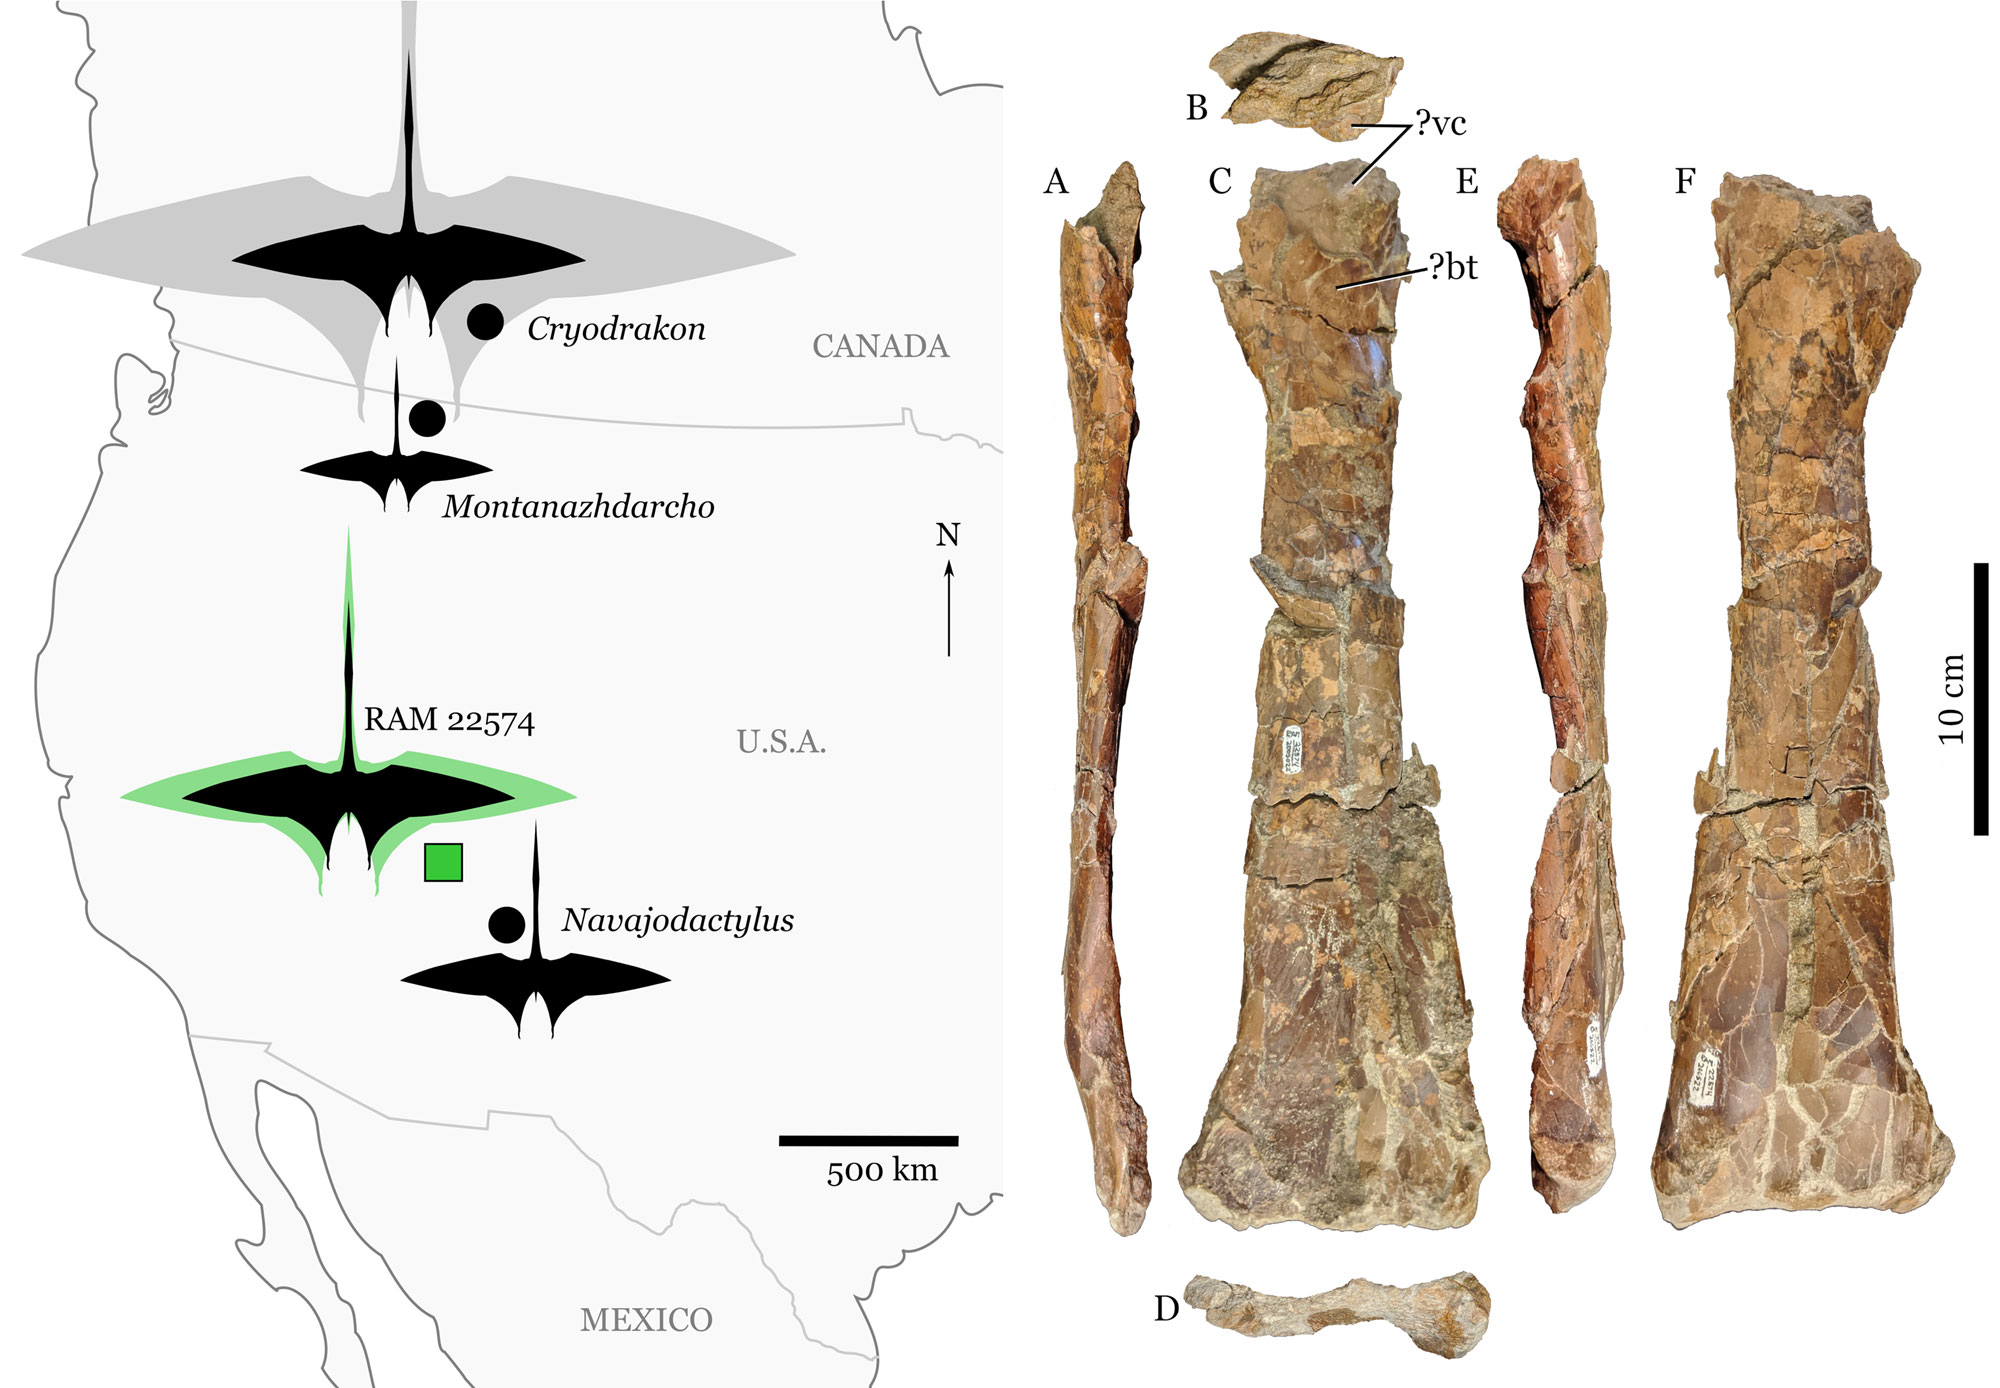 2-panel figure about pterosaurs from the Late Cretaceous of western North America. Panel 1: Map of western North America showing locations of four pterosaur finds. In the southwest, Navajodactylus was found in northern New Mexico and a larger, unnamed pterosaur was found in Utah. Panel 2: Photos of a bone from a Cretaceous pterosaur found in Utah; it might be an ulna, one of the forearm bones.